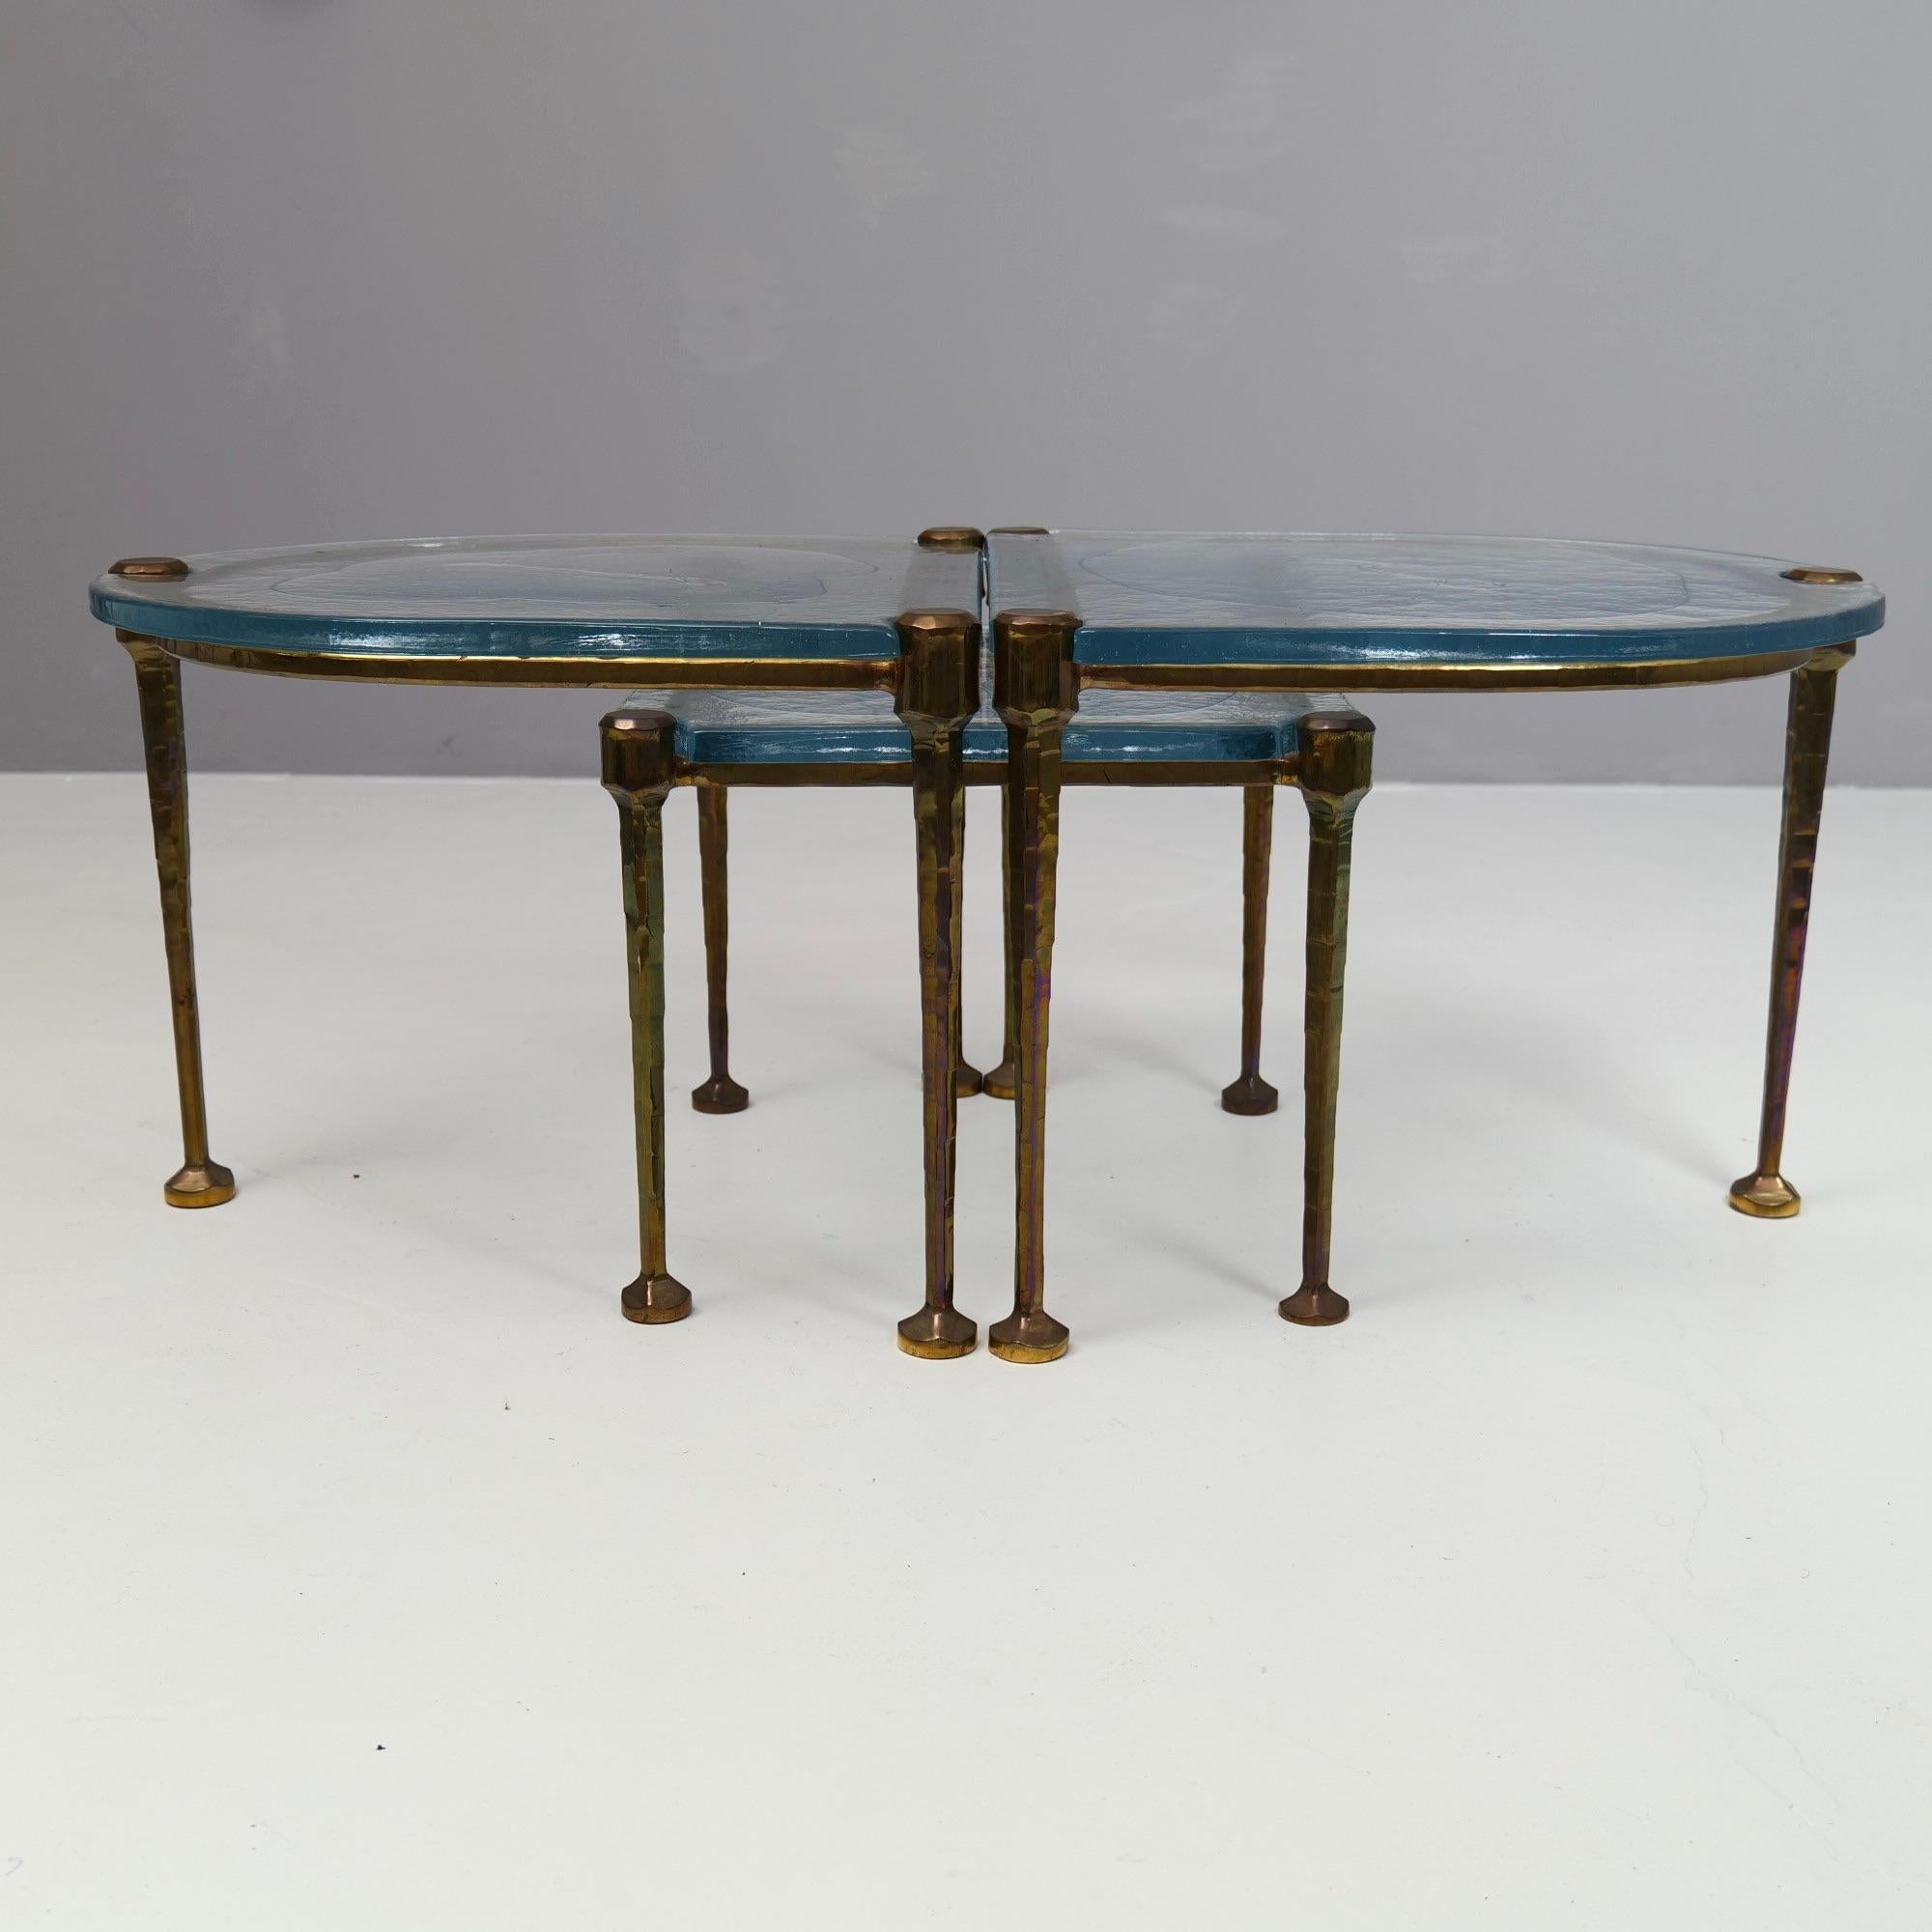 Late 20th Century forged bronze tables with blue cast glass - 1980s brutalist